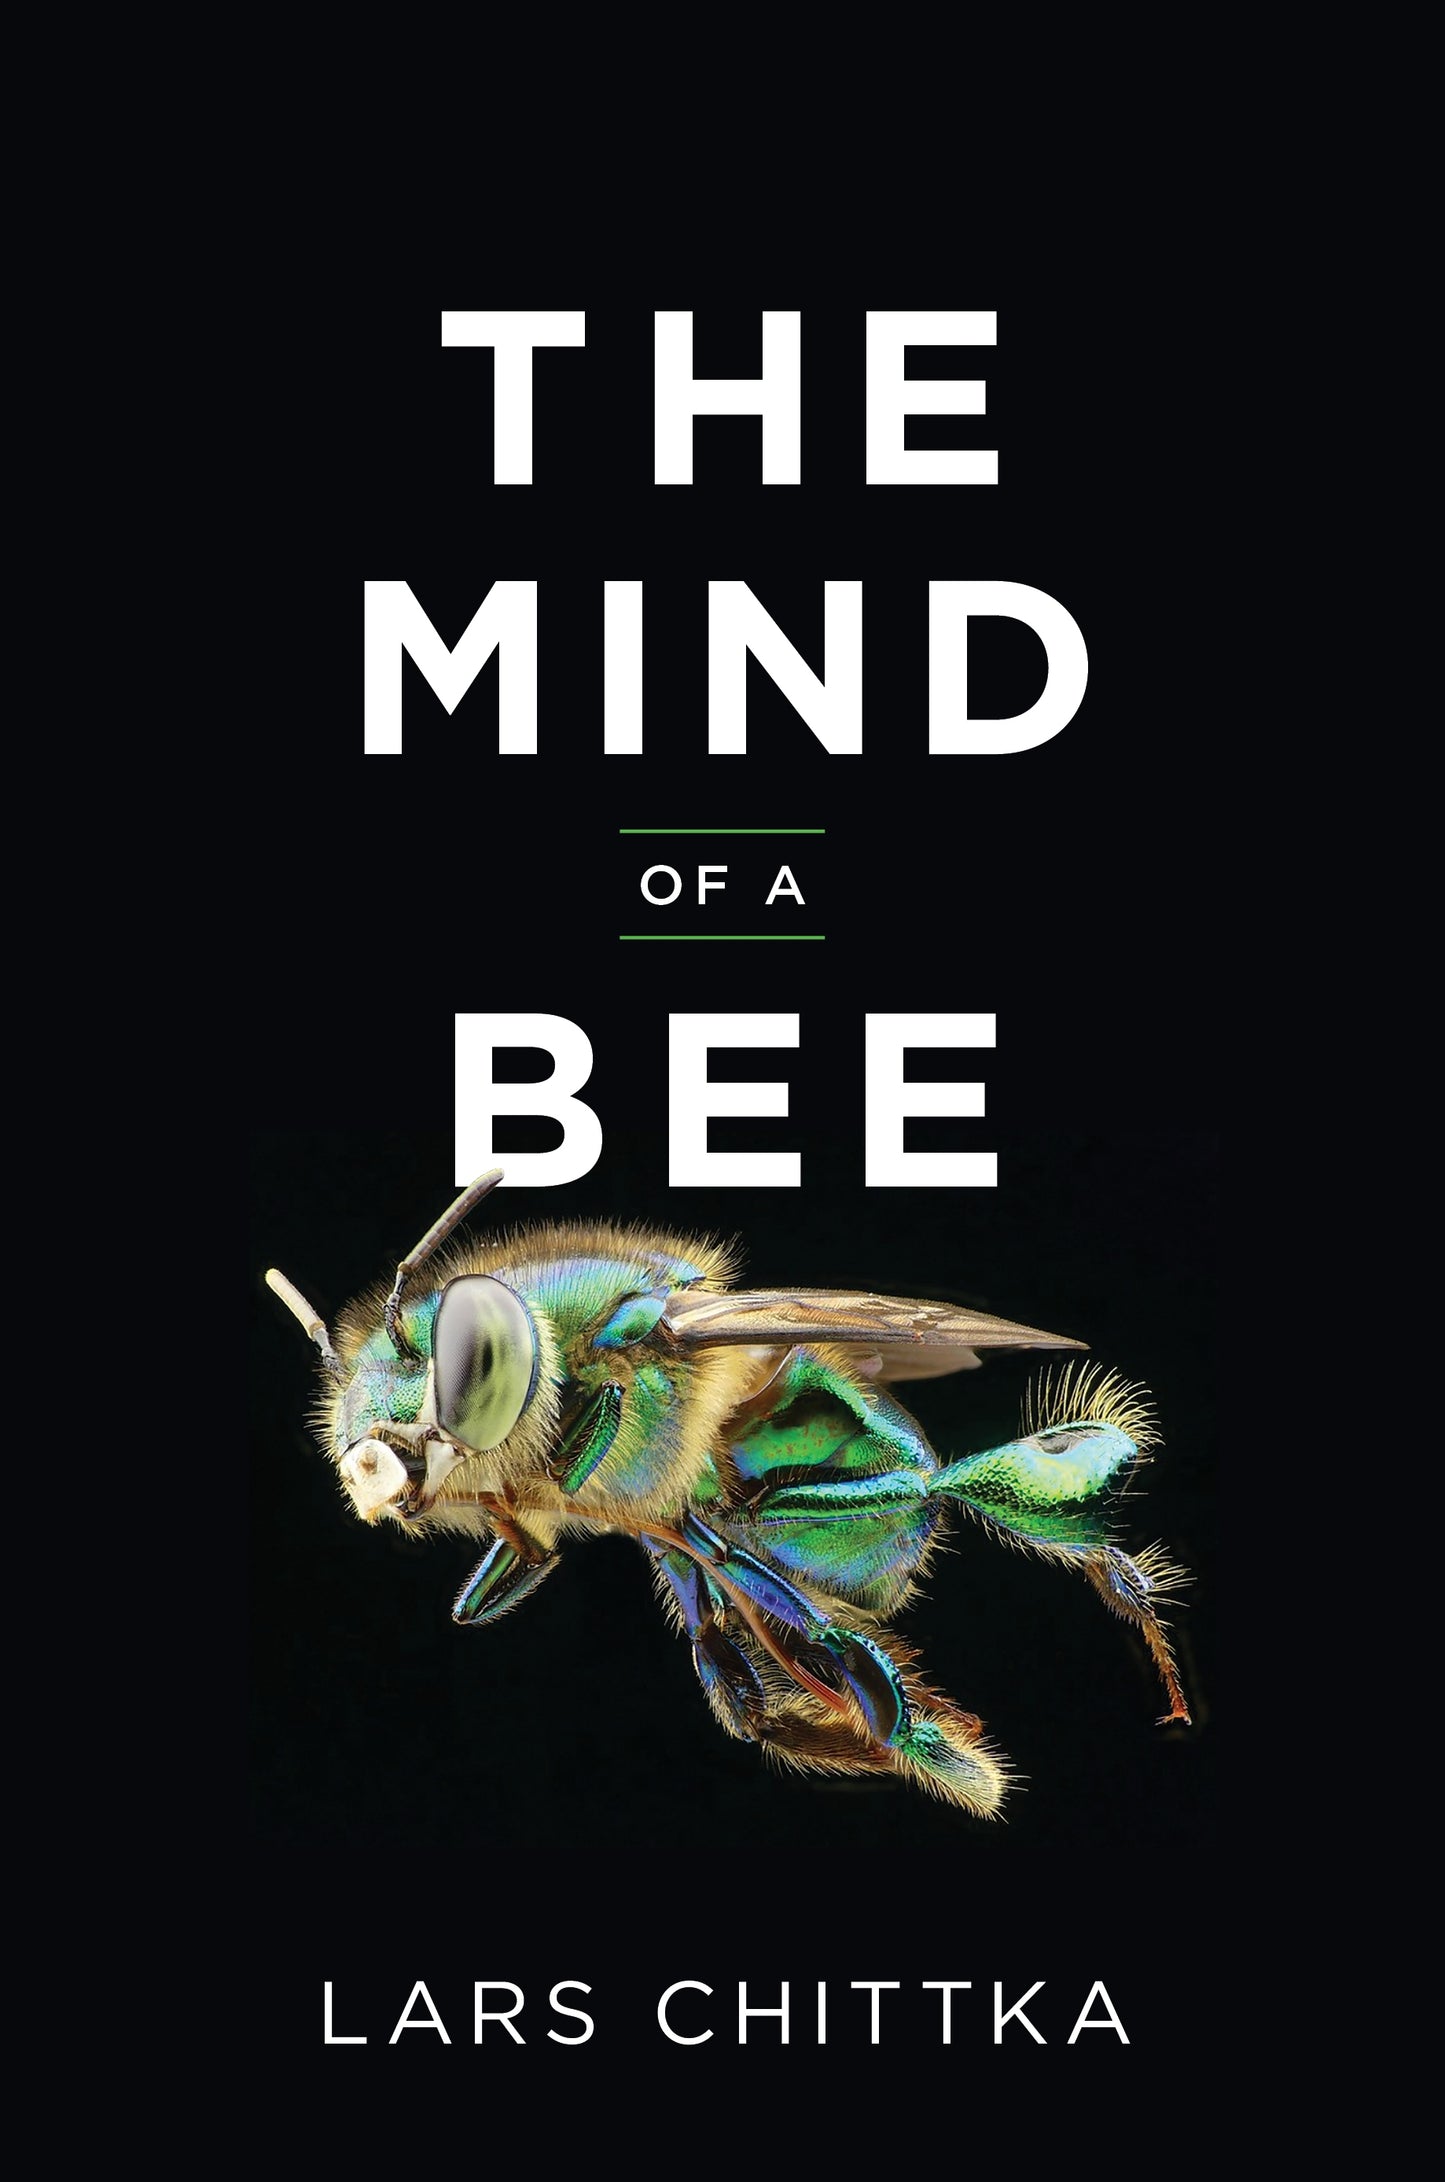 The Mind of a Bee book by Lars Chittka with close up photo of bee on cover